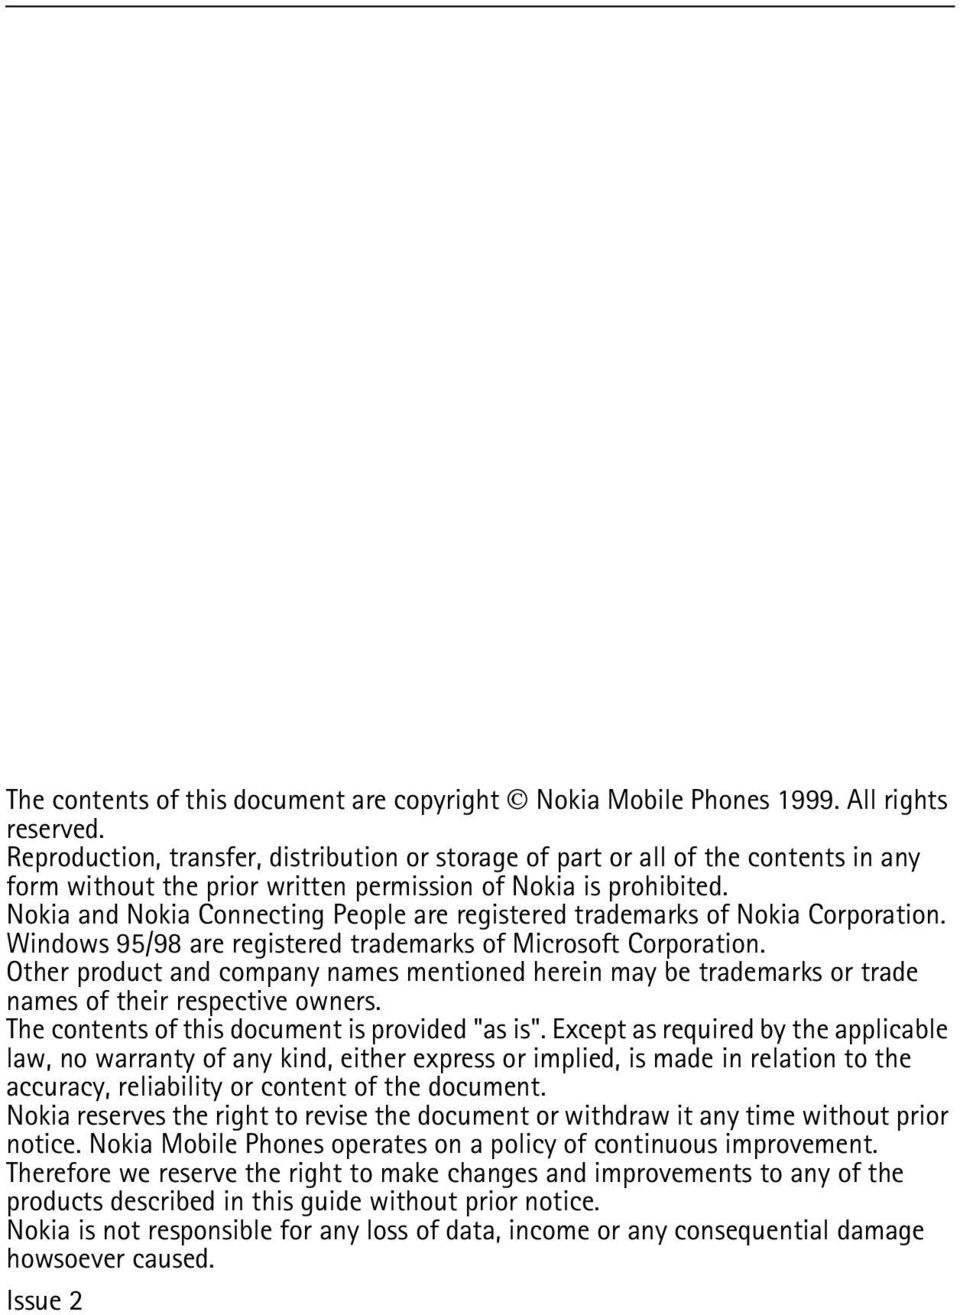 Nokia and Nokia Connecting People are registered trademarks of Nokia Corporation. Windows 95/98 are registered trademarks of Microsoft Corporation.